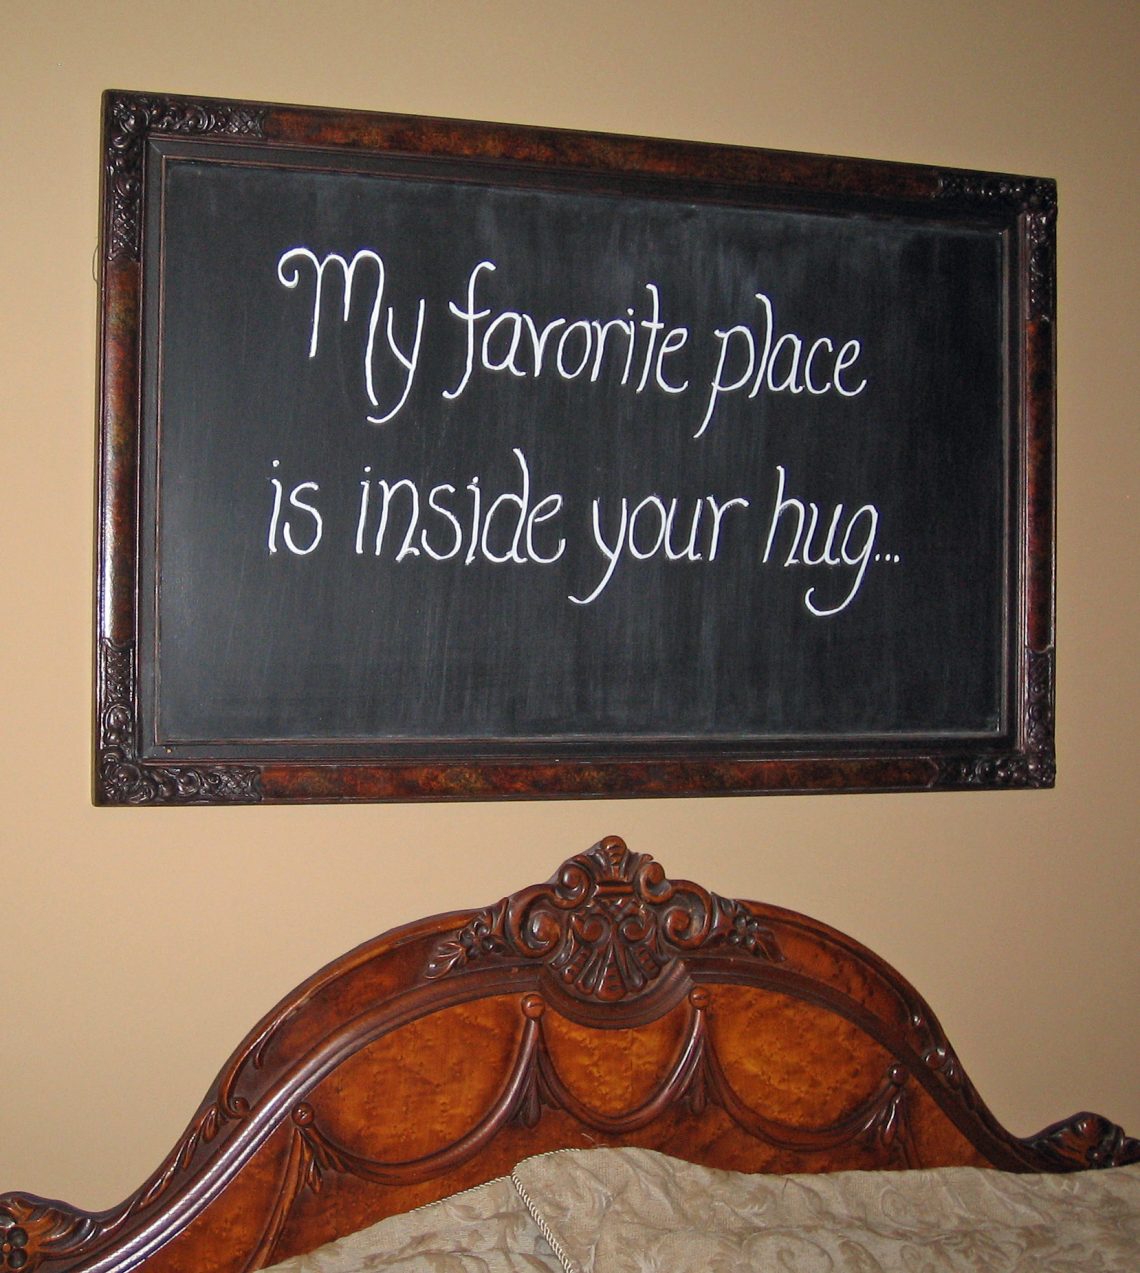 Download How To Make A Chalkboard Using A Vintage Picture Frame - Rustic Crafts & Chic Decor